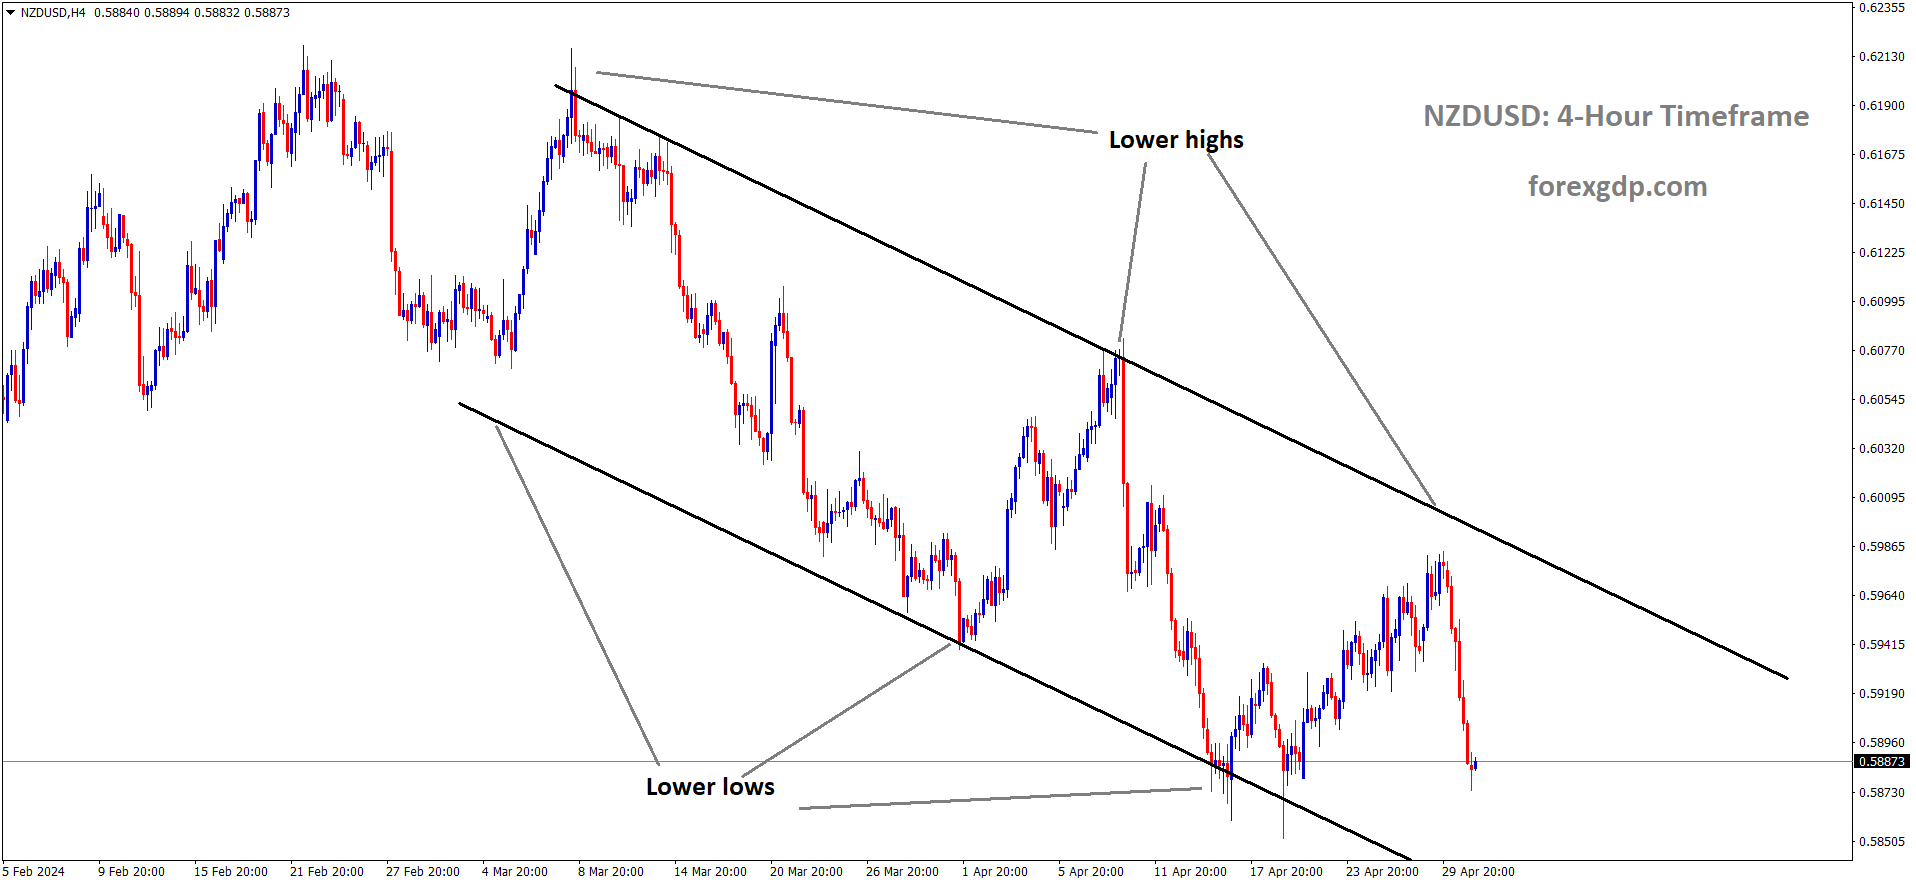 NZDUSD is moving in Descending channel and market has fallen from the lower high area of the channel